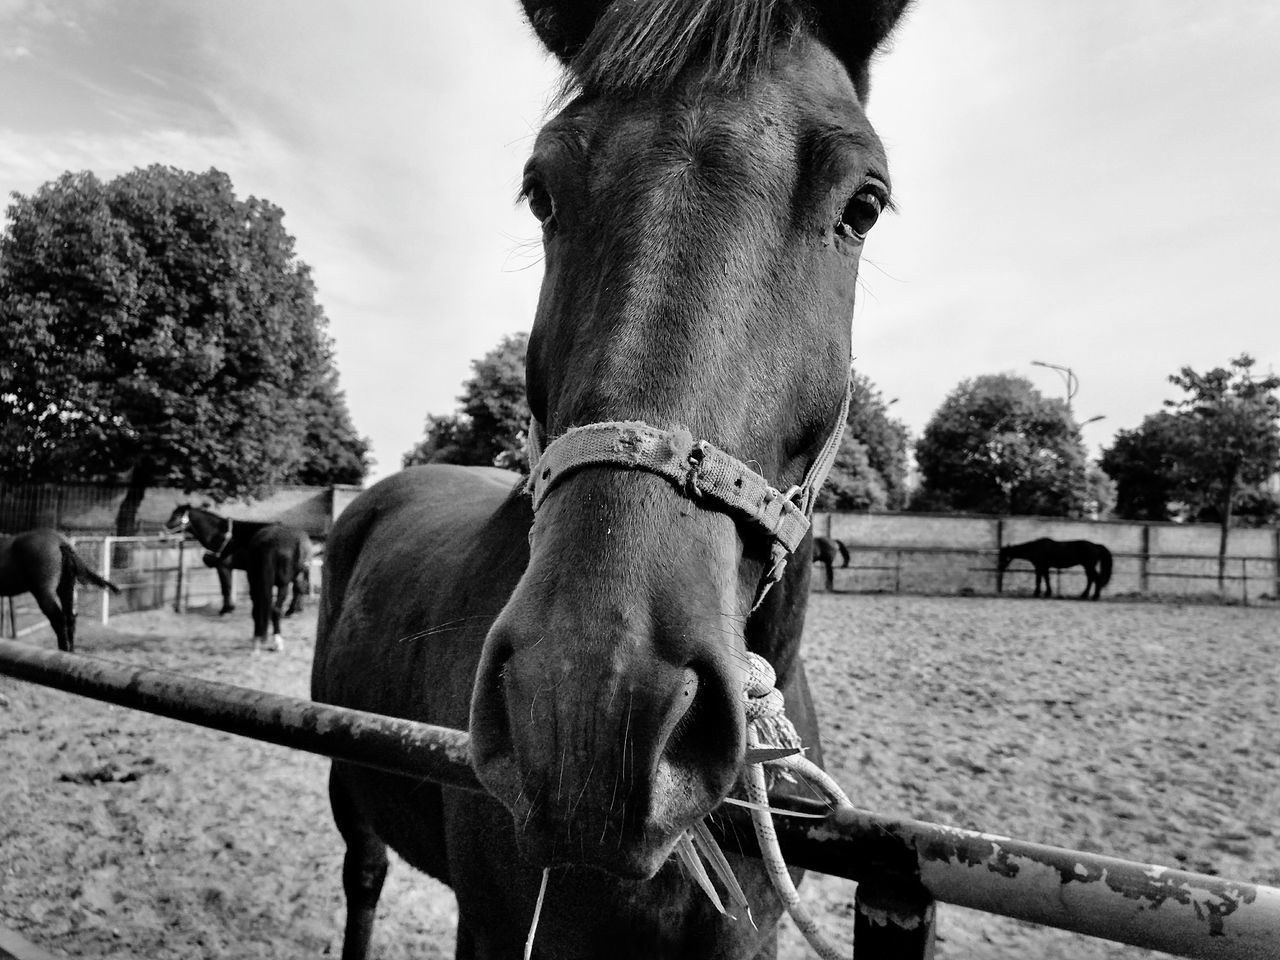 horse, domestic animals, animal themes, mammal, livestock, day, outdoors, sky, one animal, tree, no people, nature, close-up